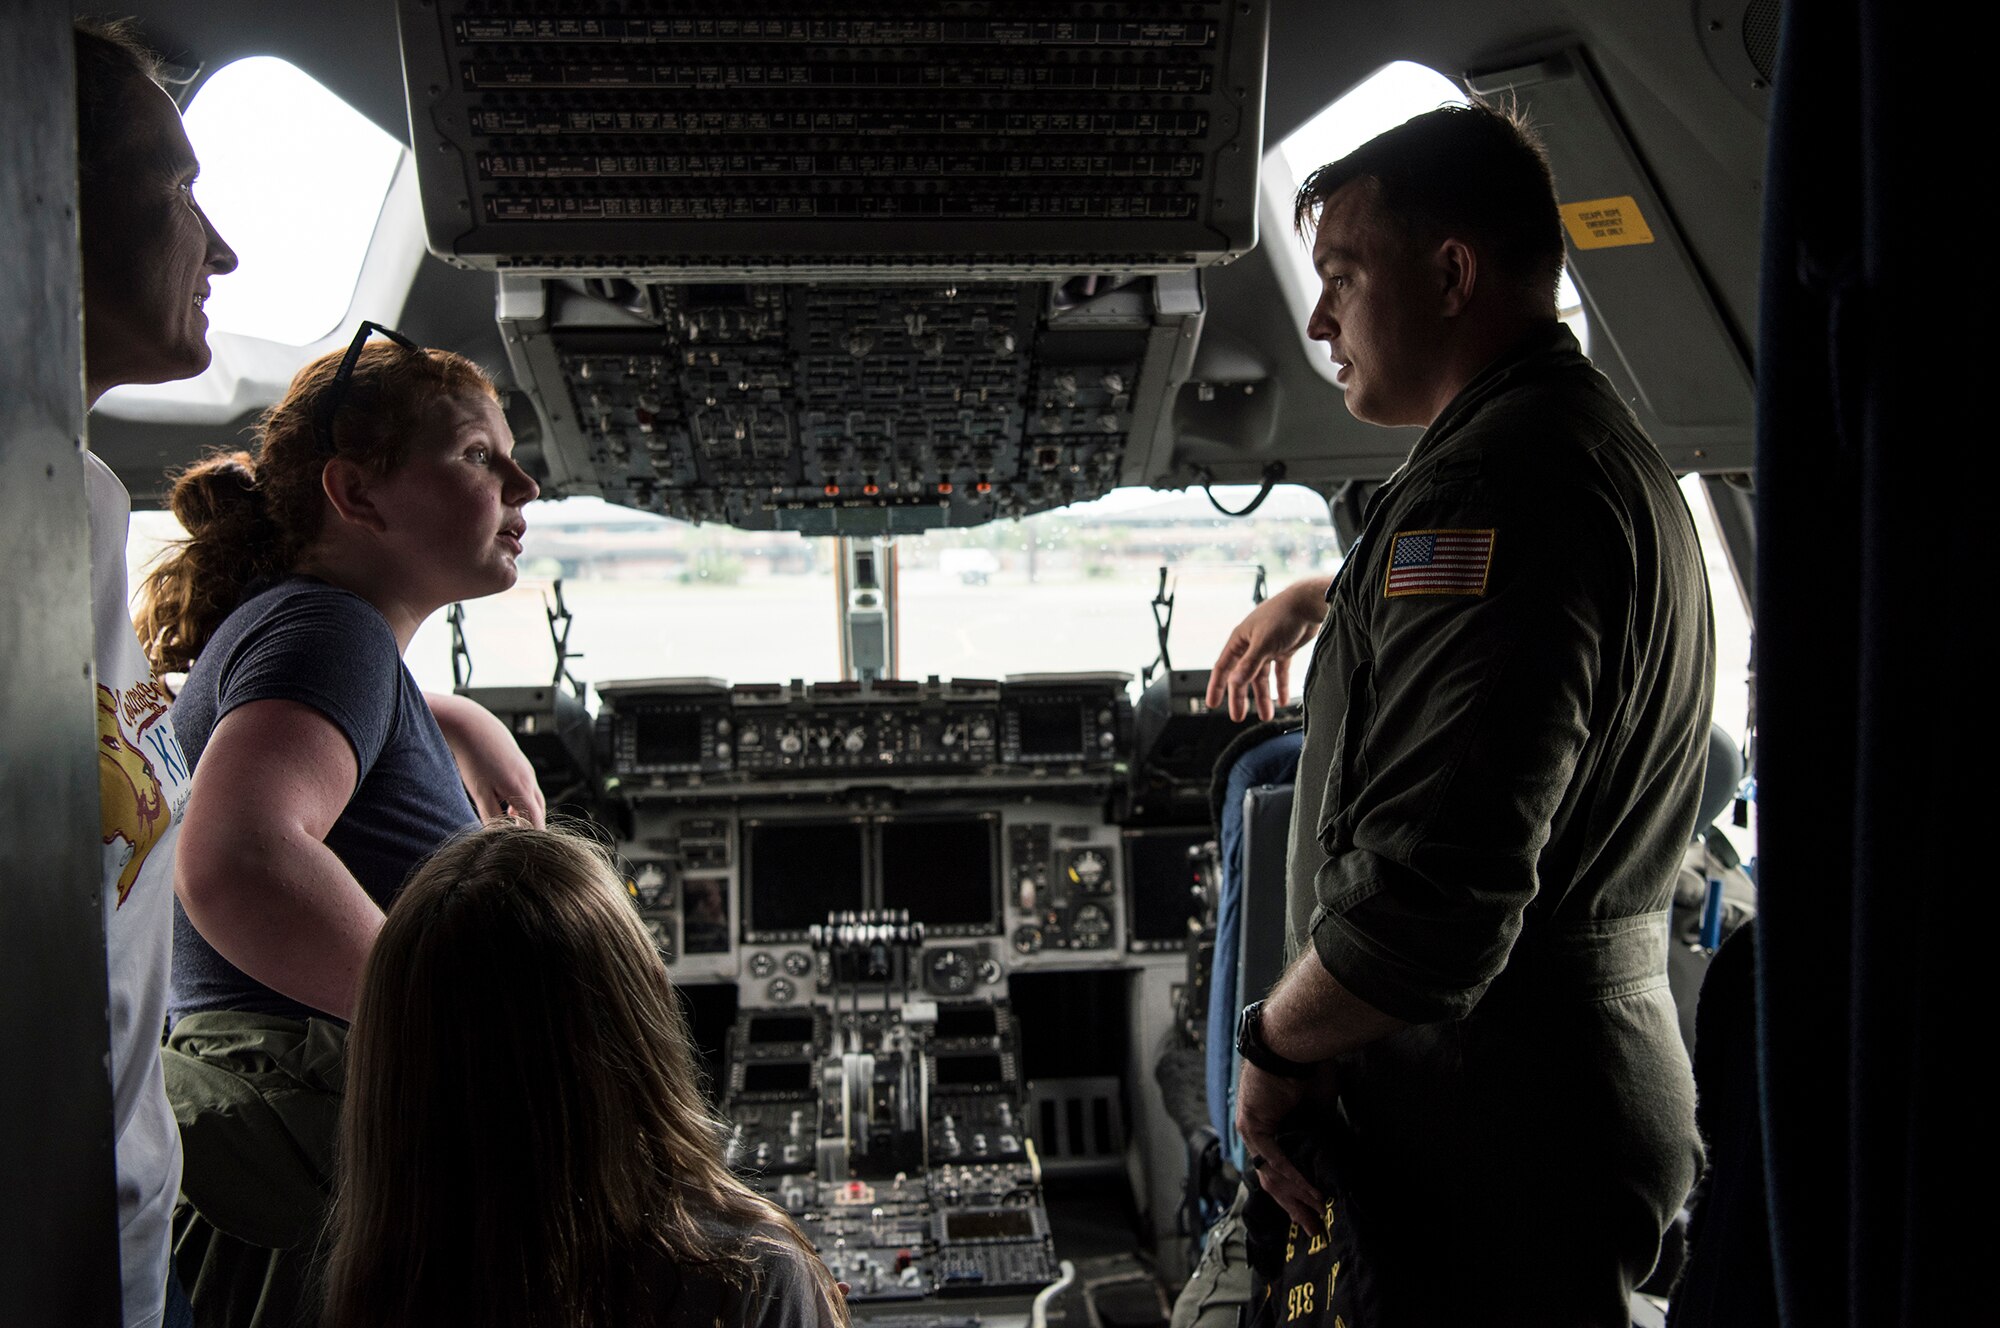 1st Lt. Thad Sollick, a C-17 pilot assigned to the 437th Operations Support Squadron, briefs Fallon Emery, a new honorary member of the 437th OSS, and her family inside the cockpit of a C-17 Globemaster III aircraft Nov. 7, 2018, at Joint Base Charleston, S.C., as part of the Airman for a Day program.